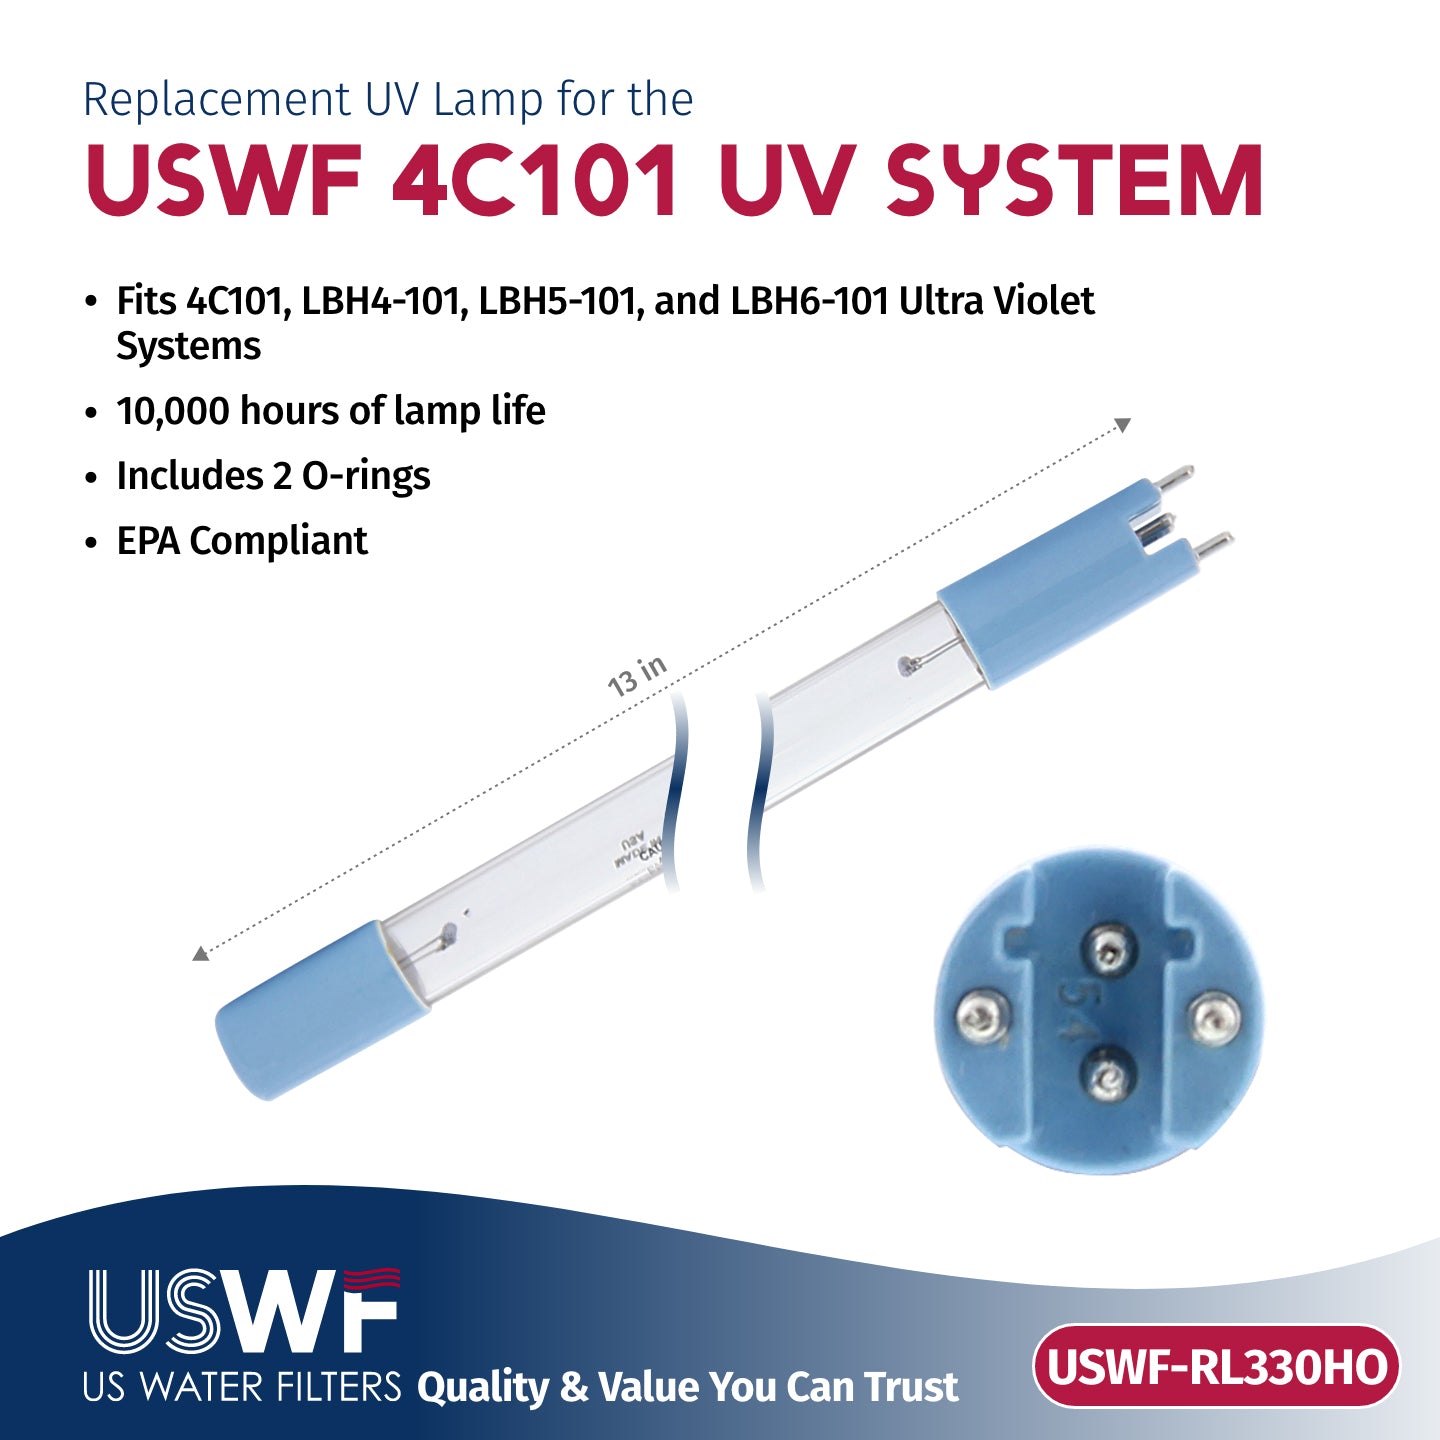 USWF RL330HO Replacement UV Lamp | Fits US Water Filters 4C101 Whole House UV System